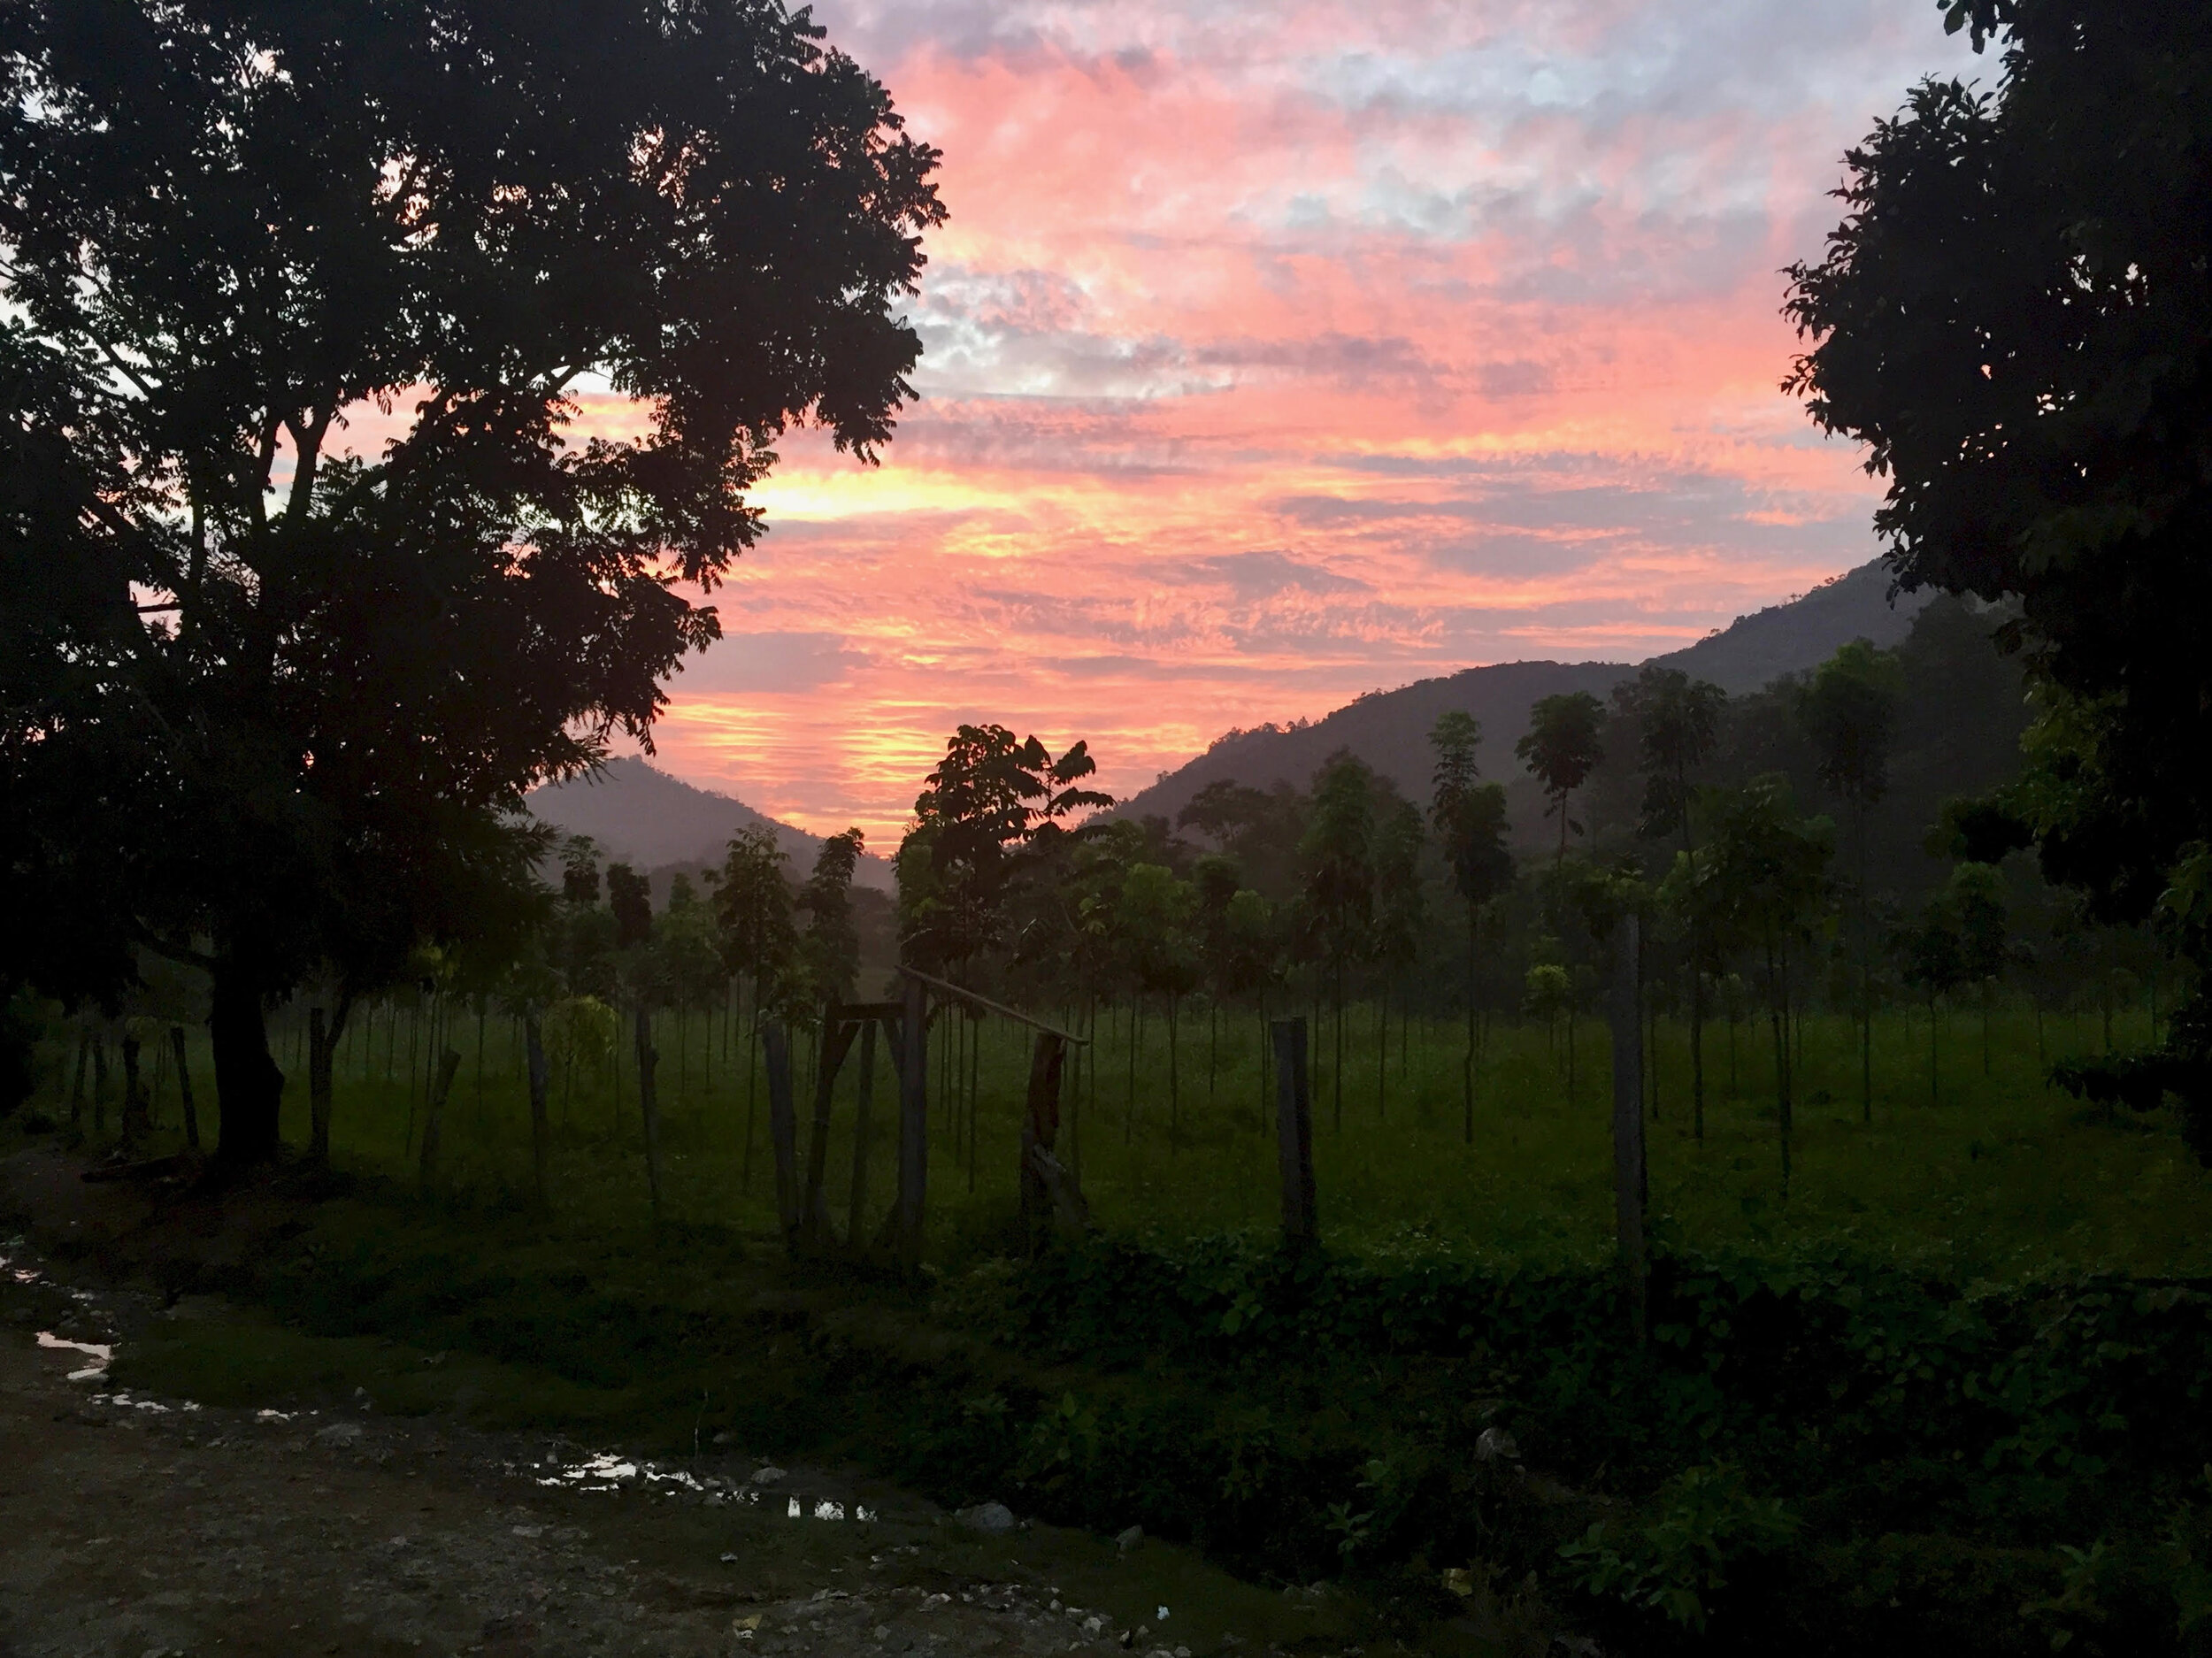 A new dawn for pesticide safety, cancer prevention, and environmental health in El Rosario and surrounding communities.